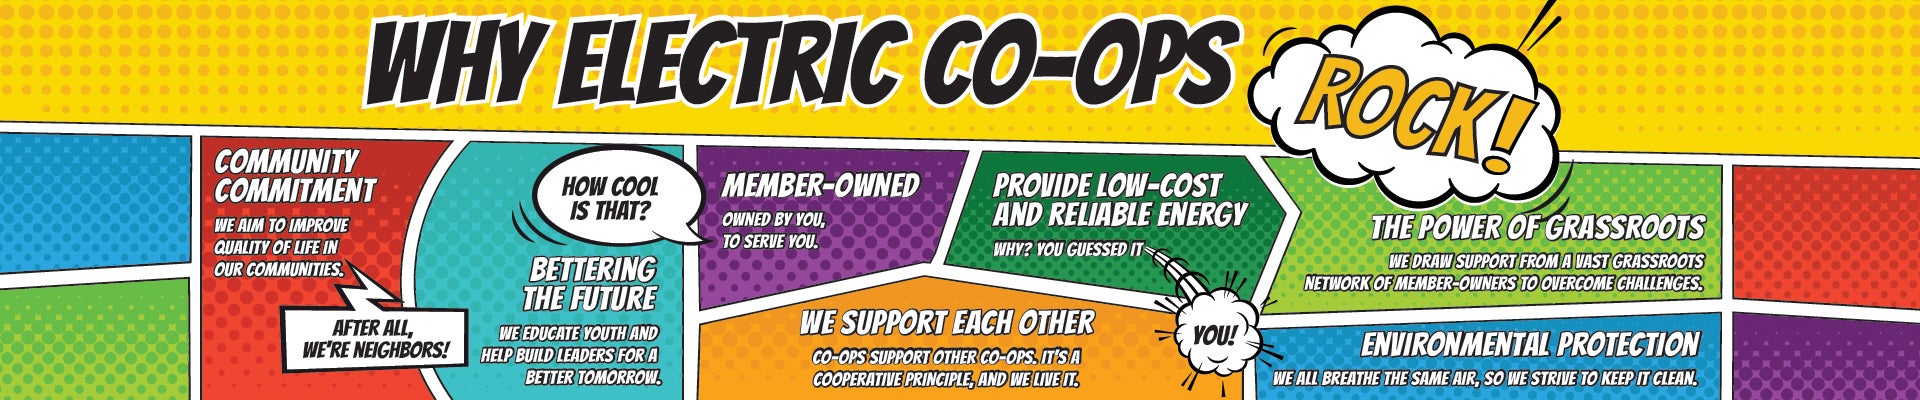 Why Co-ops Rock Graphic